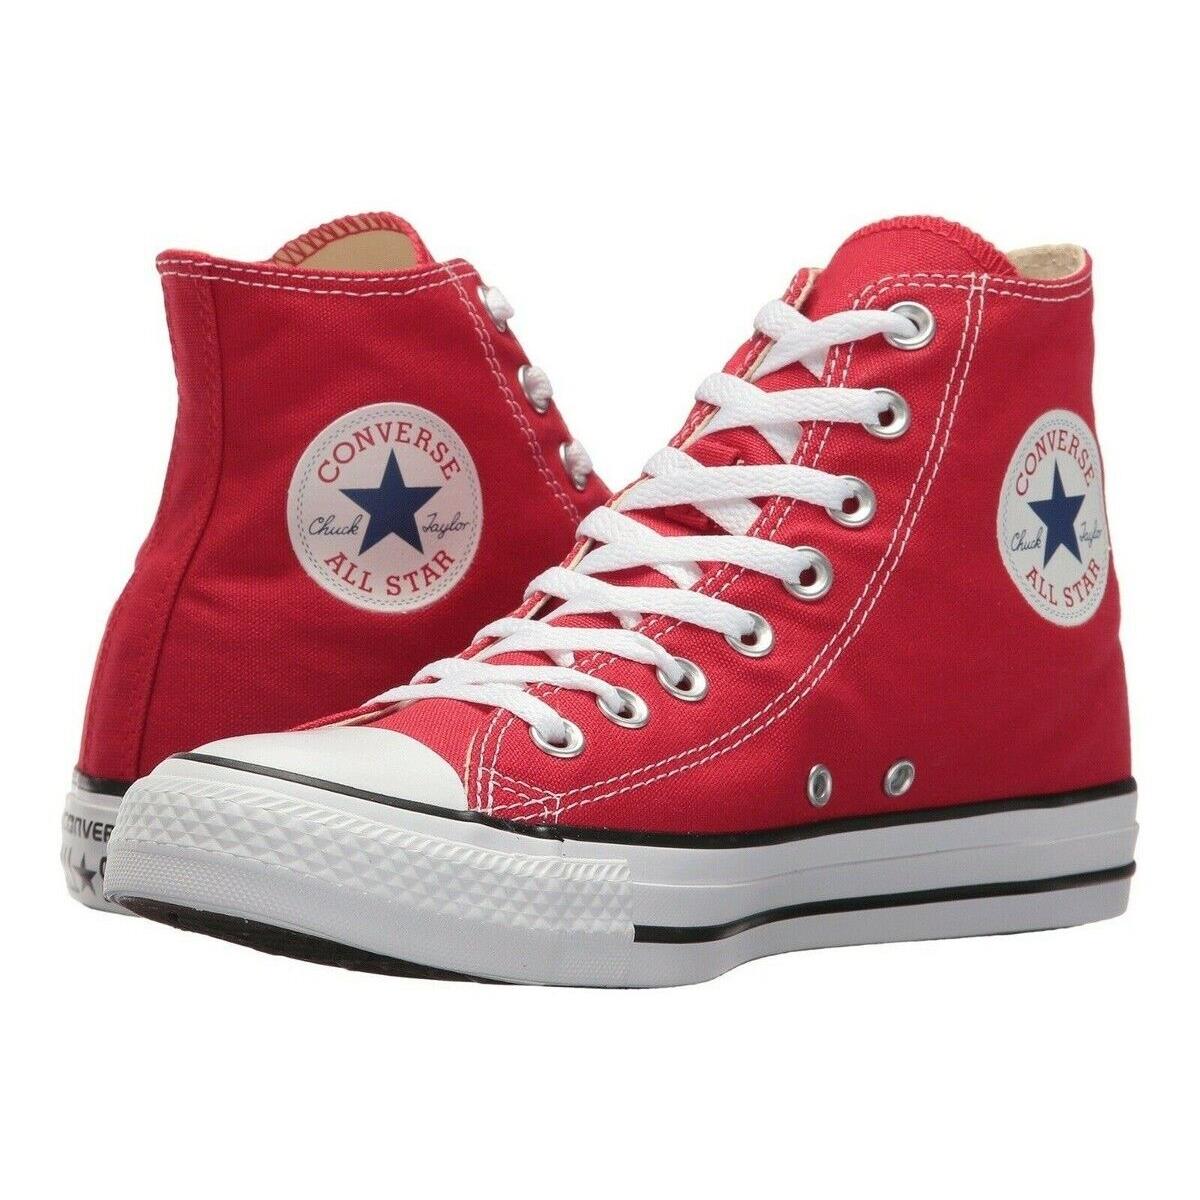 Converse Men`s Chuck Taylor All Star Classic High Top Sneaker Shoes Red